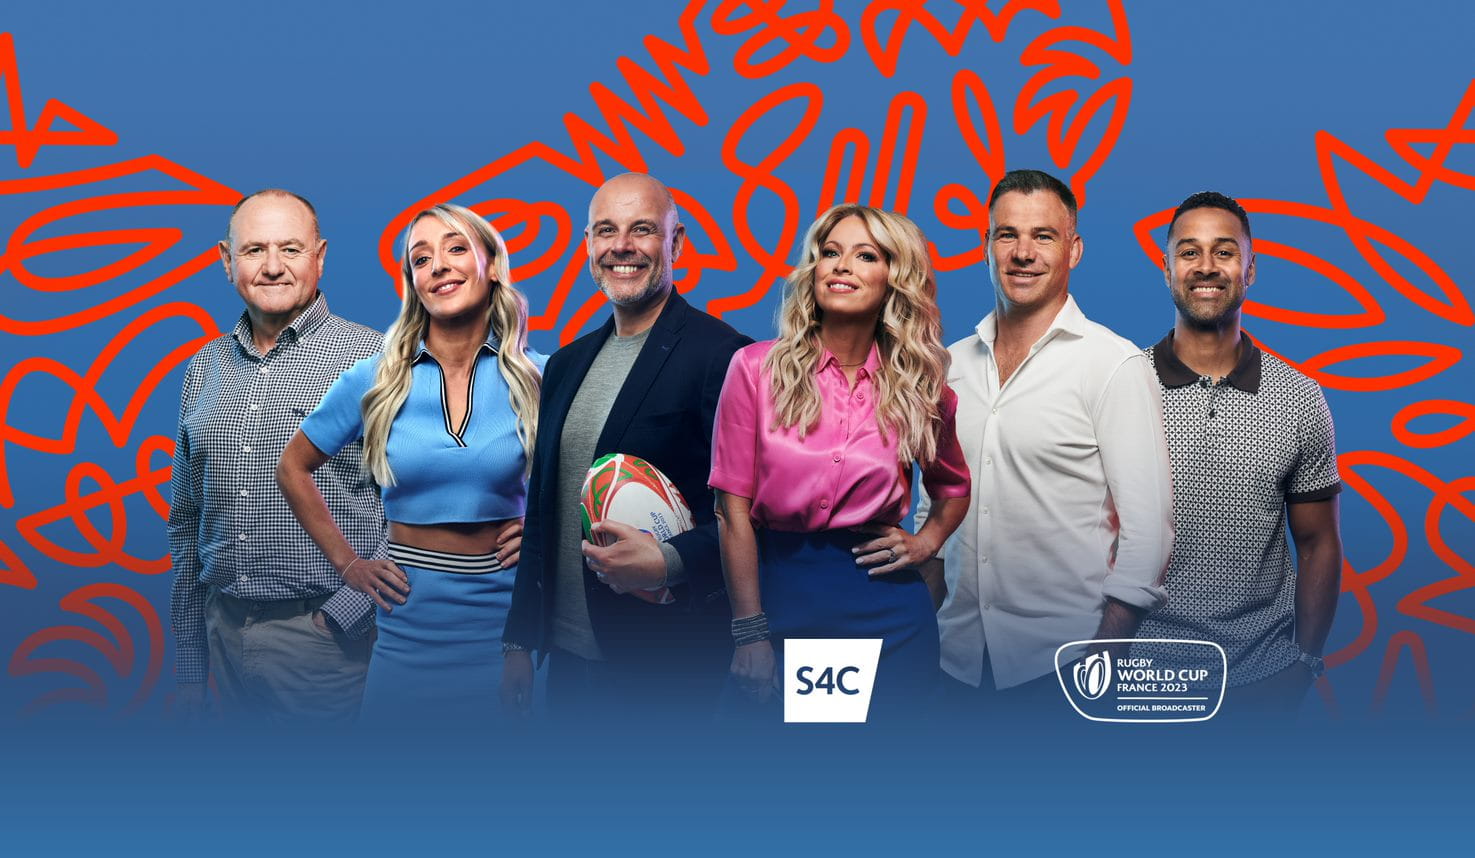 WHISPER AND S4C TO DELIVER RUGBY WORLD CUP LIVE TO WALES